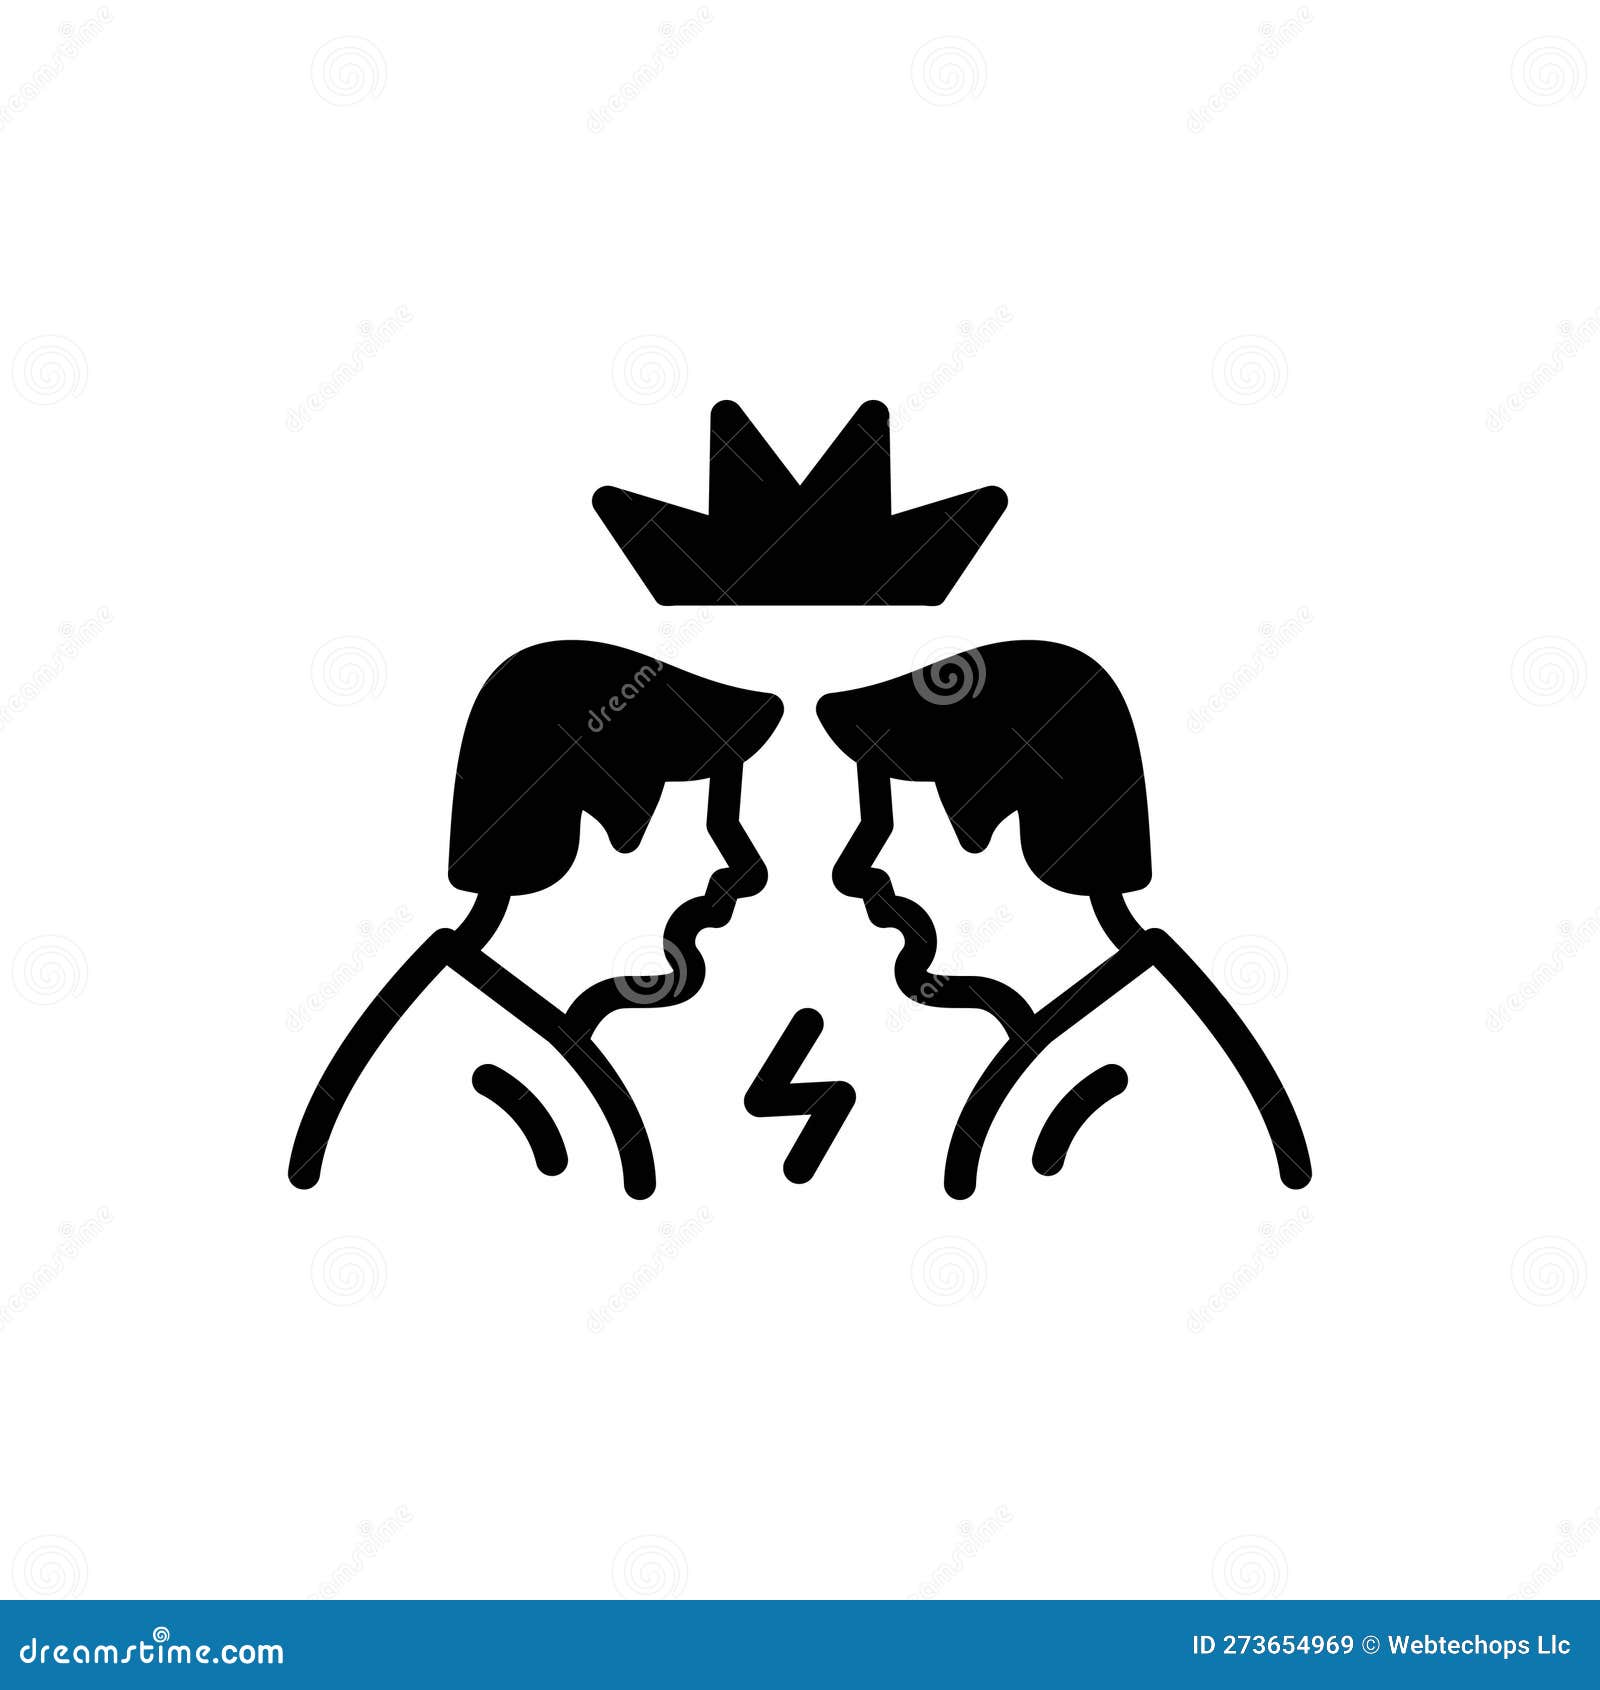 black solid icon for dispute, fight and commotion